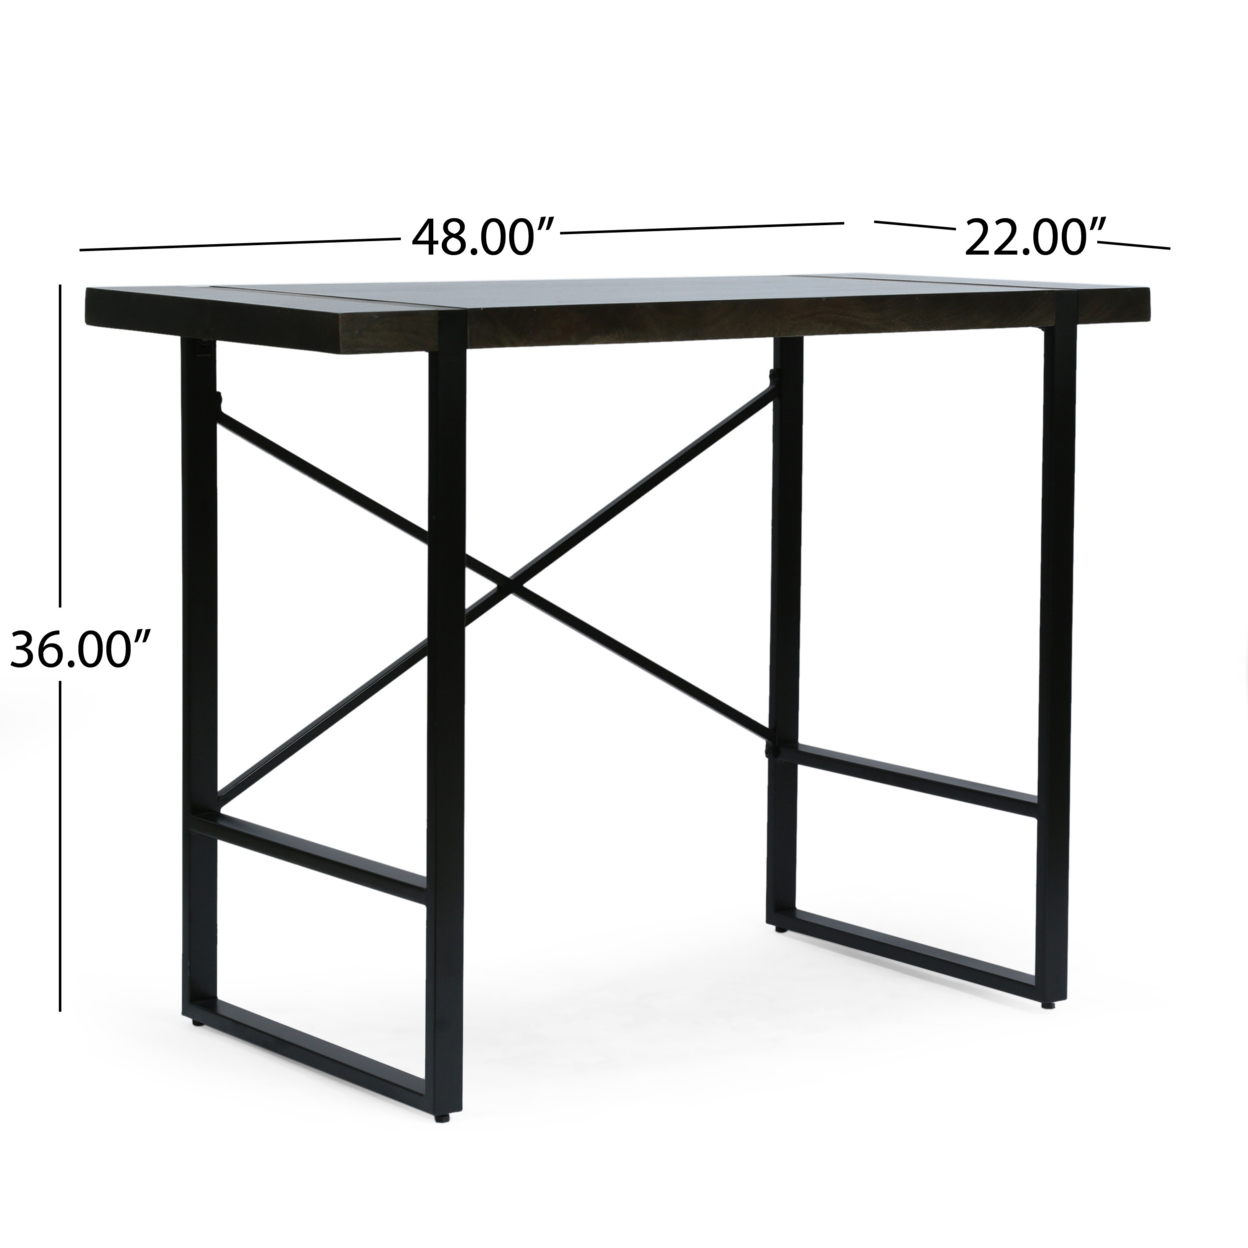 Vandalia Modern Industrial Handcrafted Mango Wood Counter Height Desk, Brown And Black